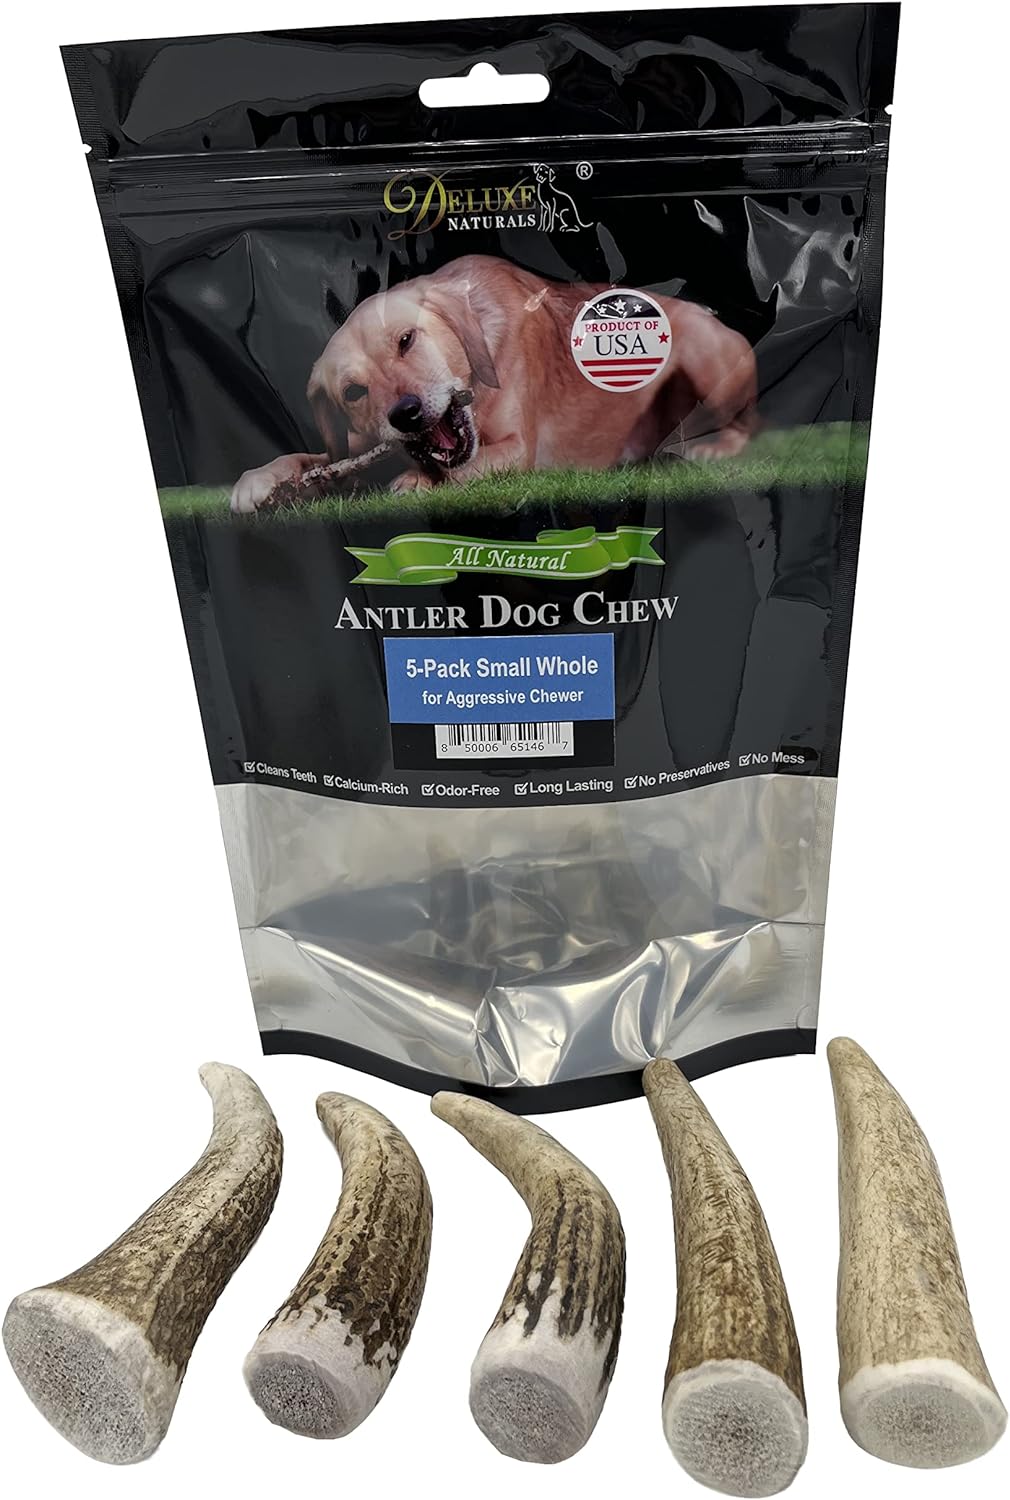 Elk Antler Chews for Dogs | Naturally Shed USA Collected Elk Antlers | All Natural A-Grade Premium Elk Antler Dog Chews | Product of USA, 5-Pack Small Whole